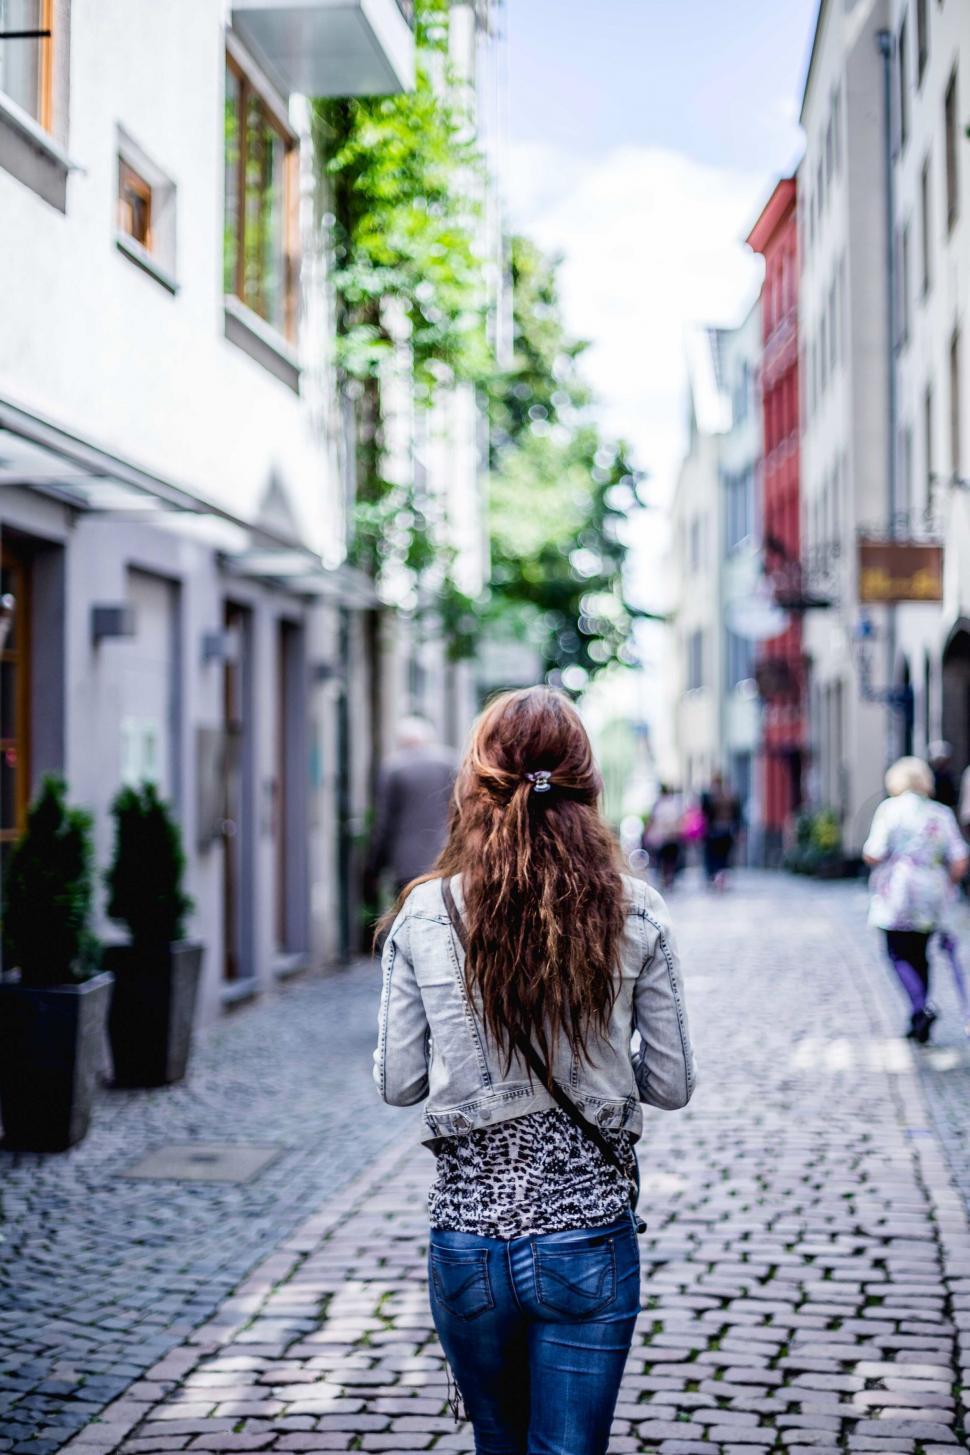 Free Image of Woman walking down a charming alleyway 